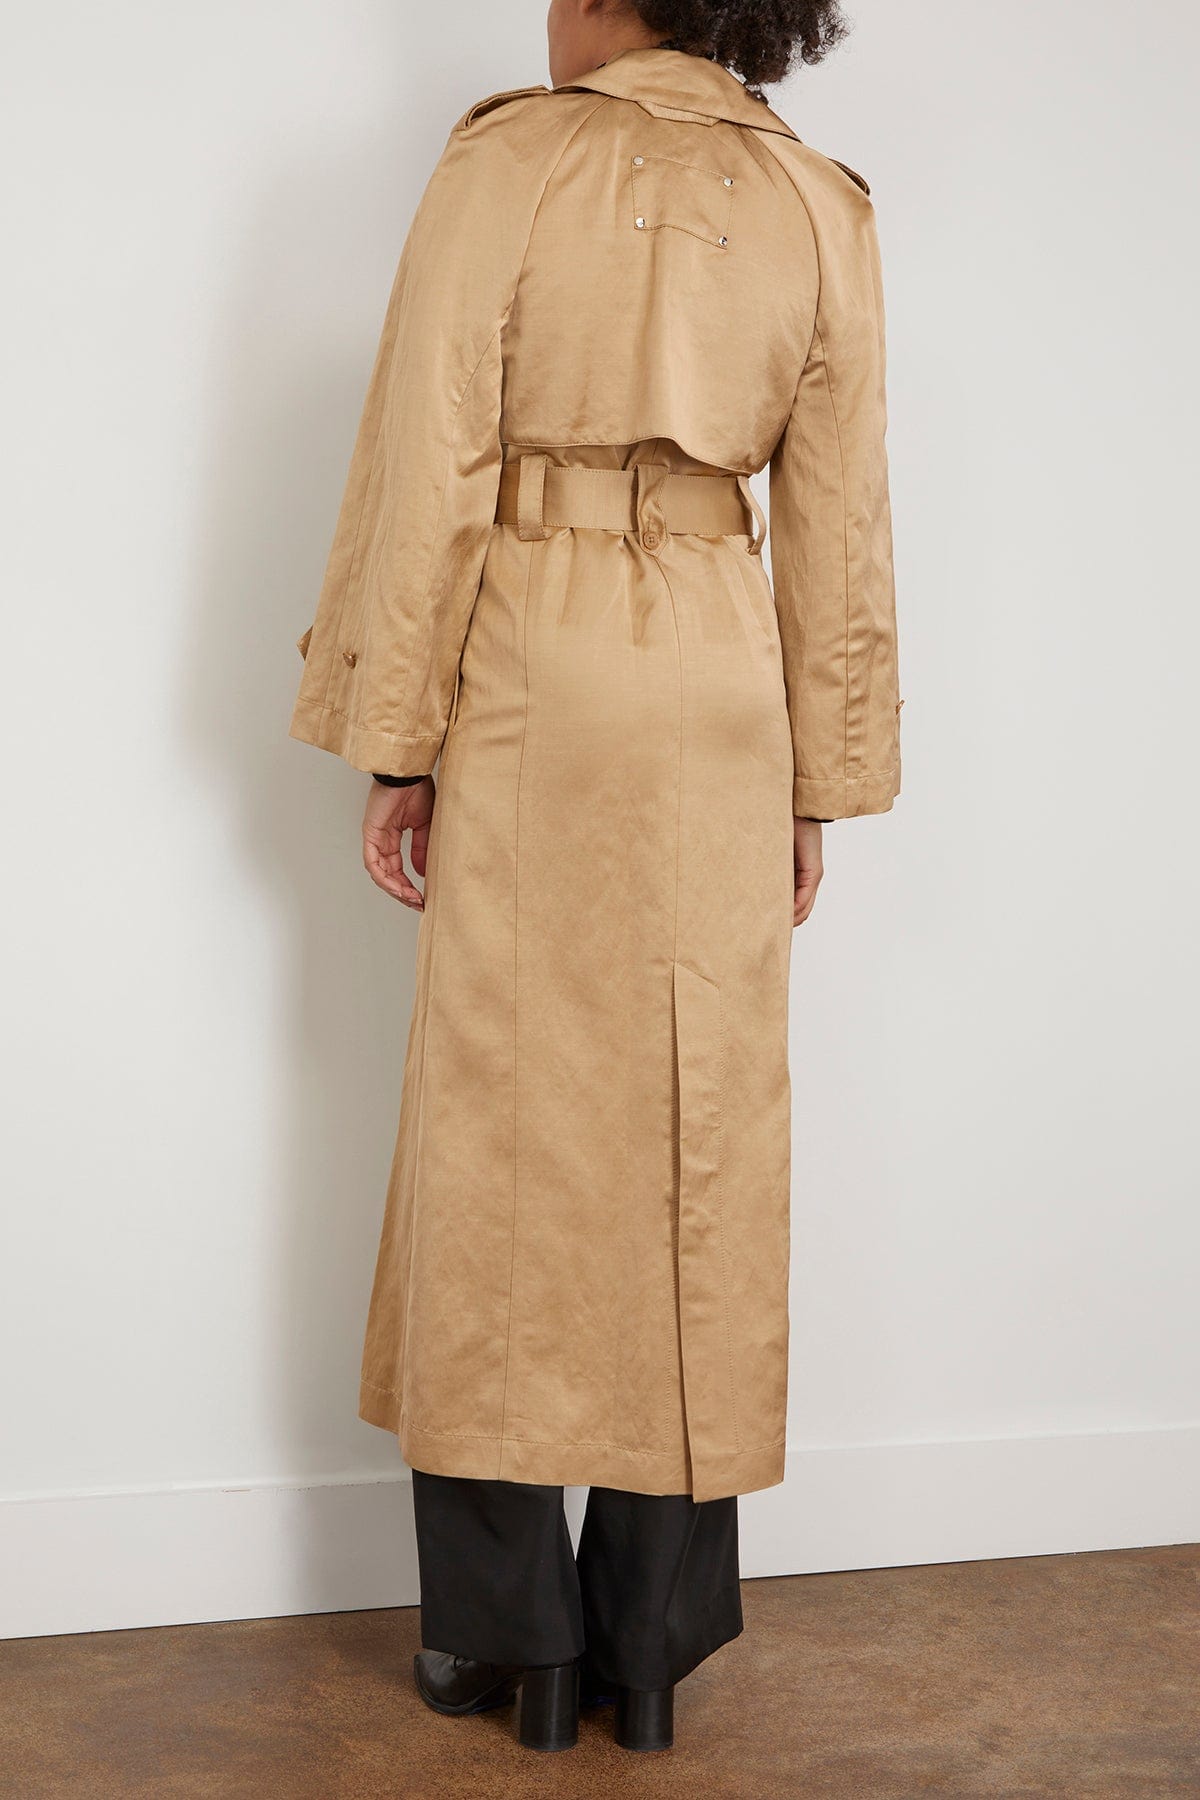 Dorothee Schumacher Coats Slouchy Coolness Trench Coat in Warm Beige Dorothee Schumacher Slouchy Coolness Trench Coat in Warm Beige